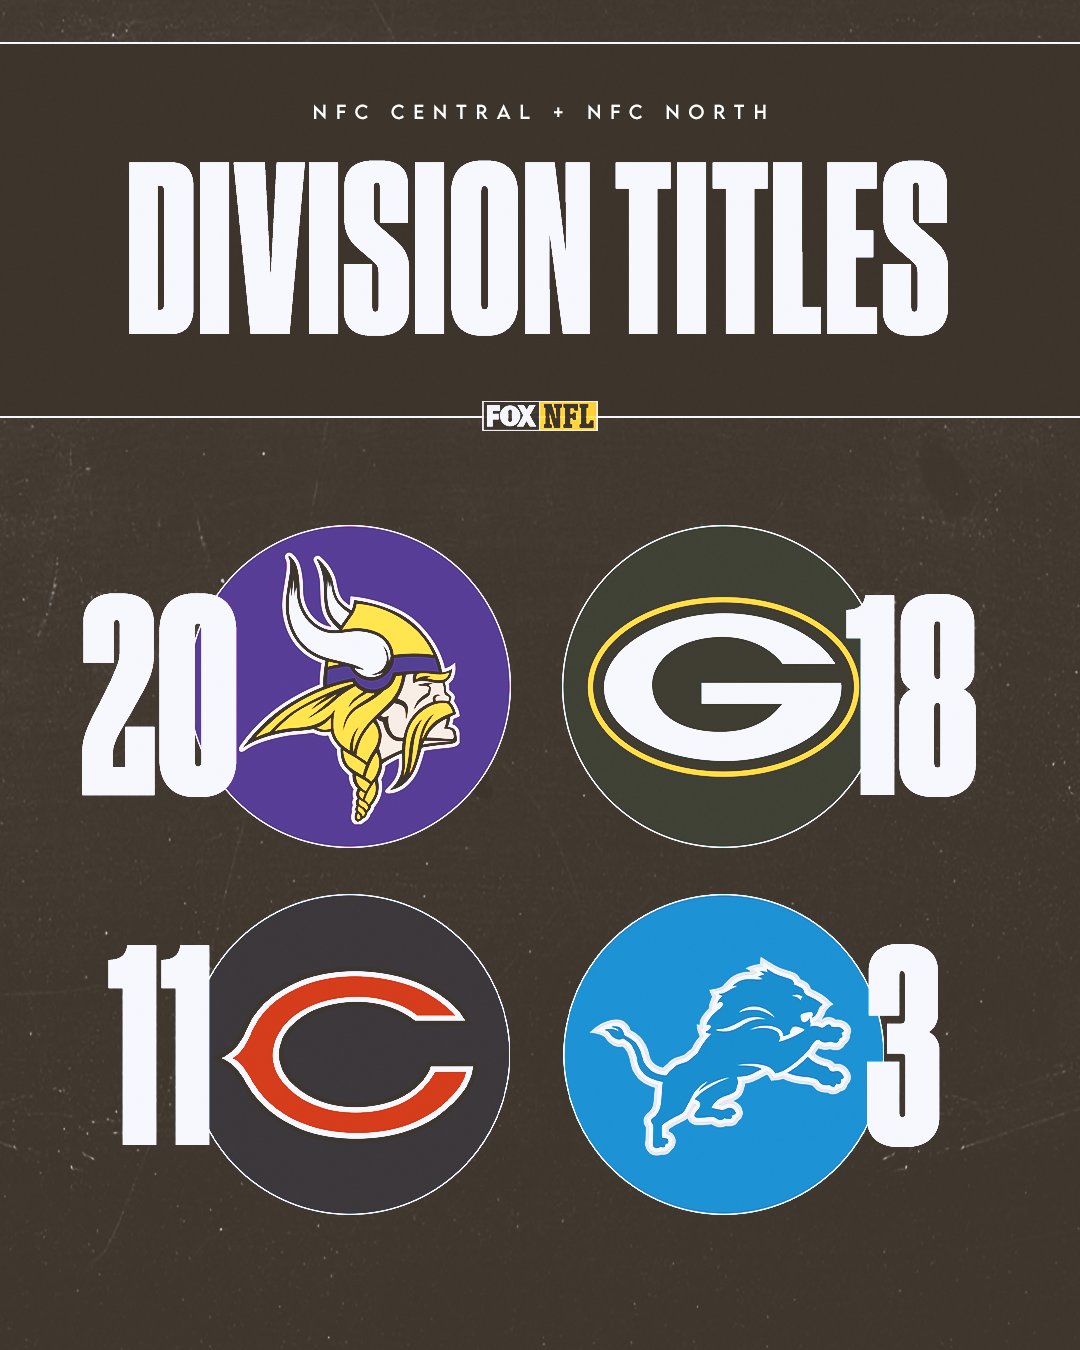 FOX Sports: NFL on X: 'Vikings with the most division titles